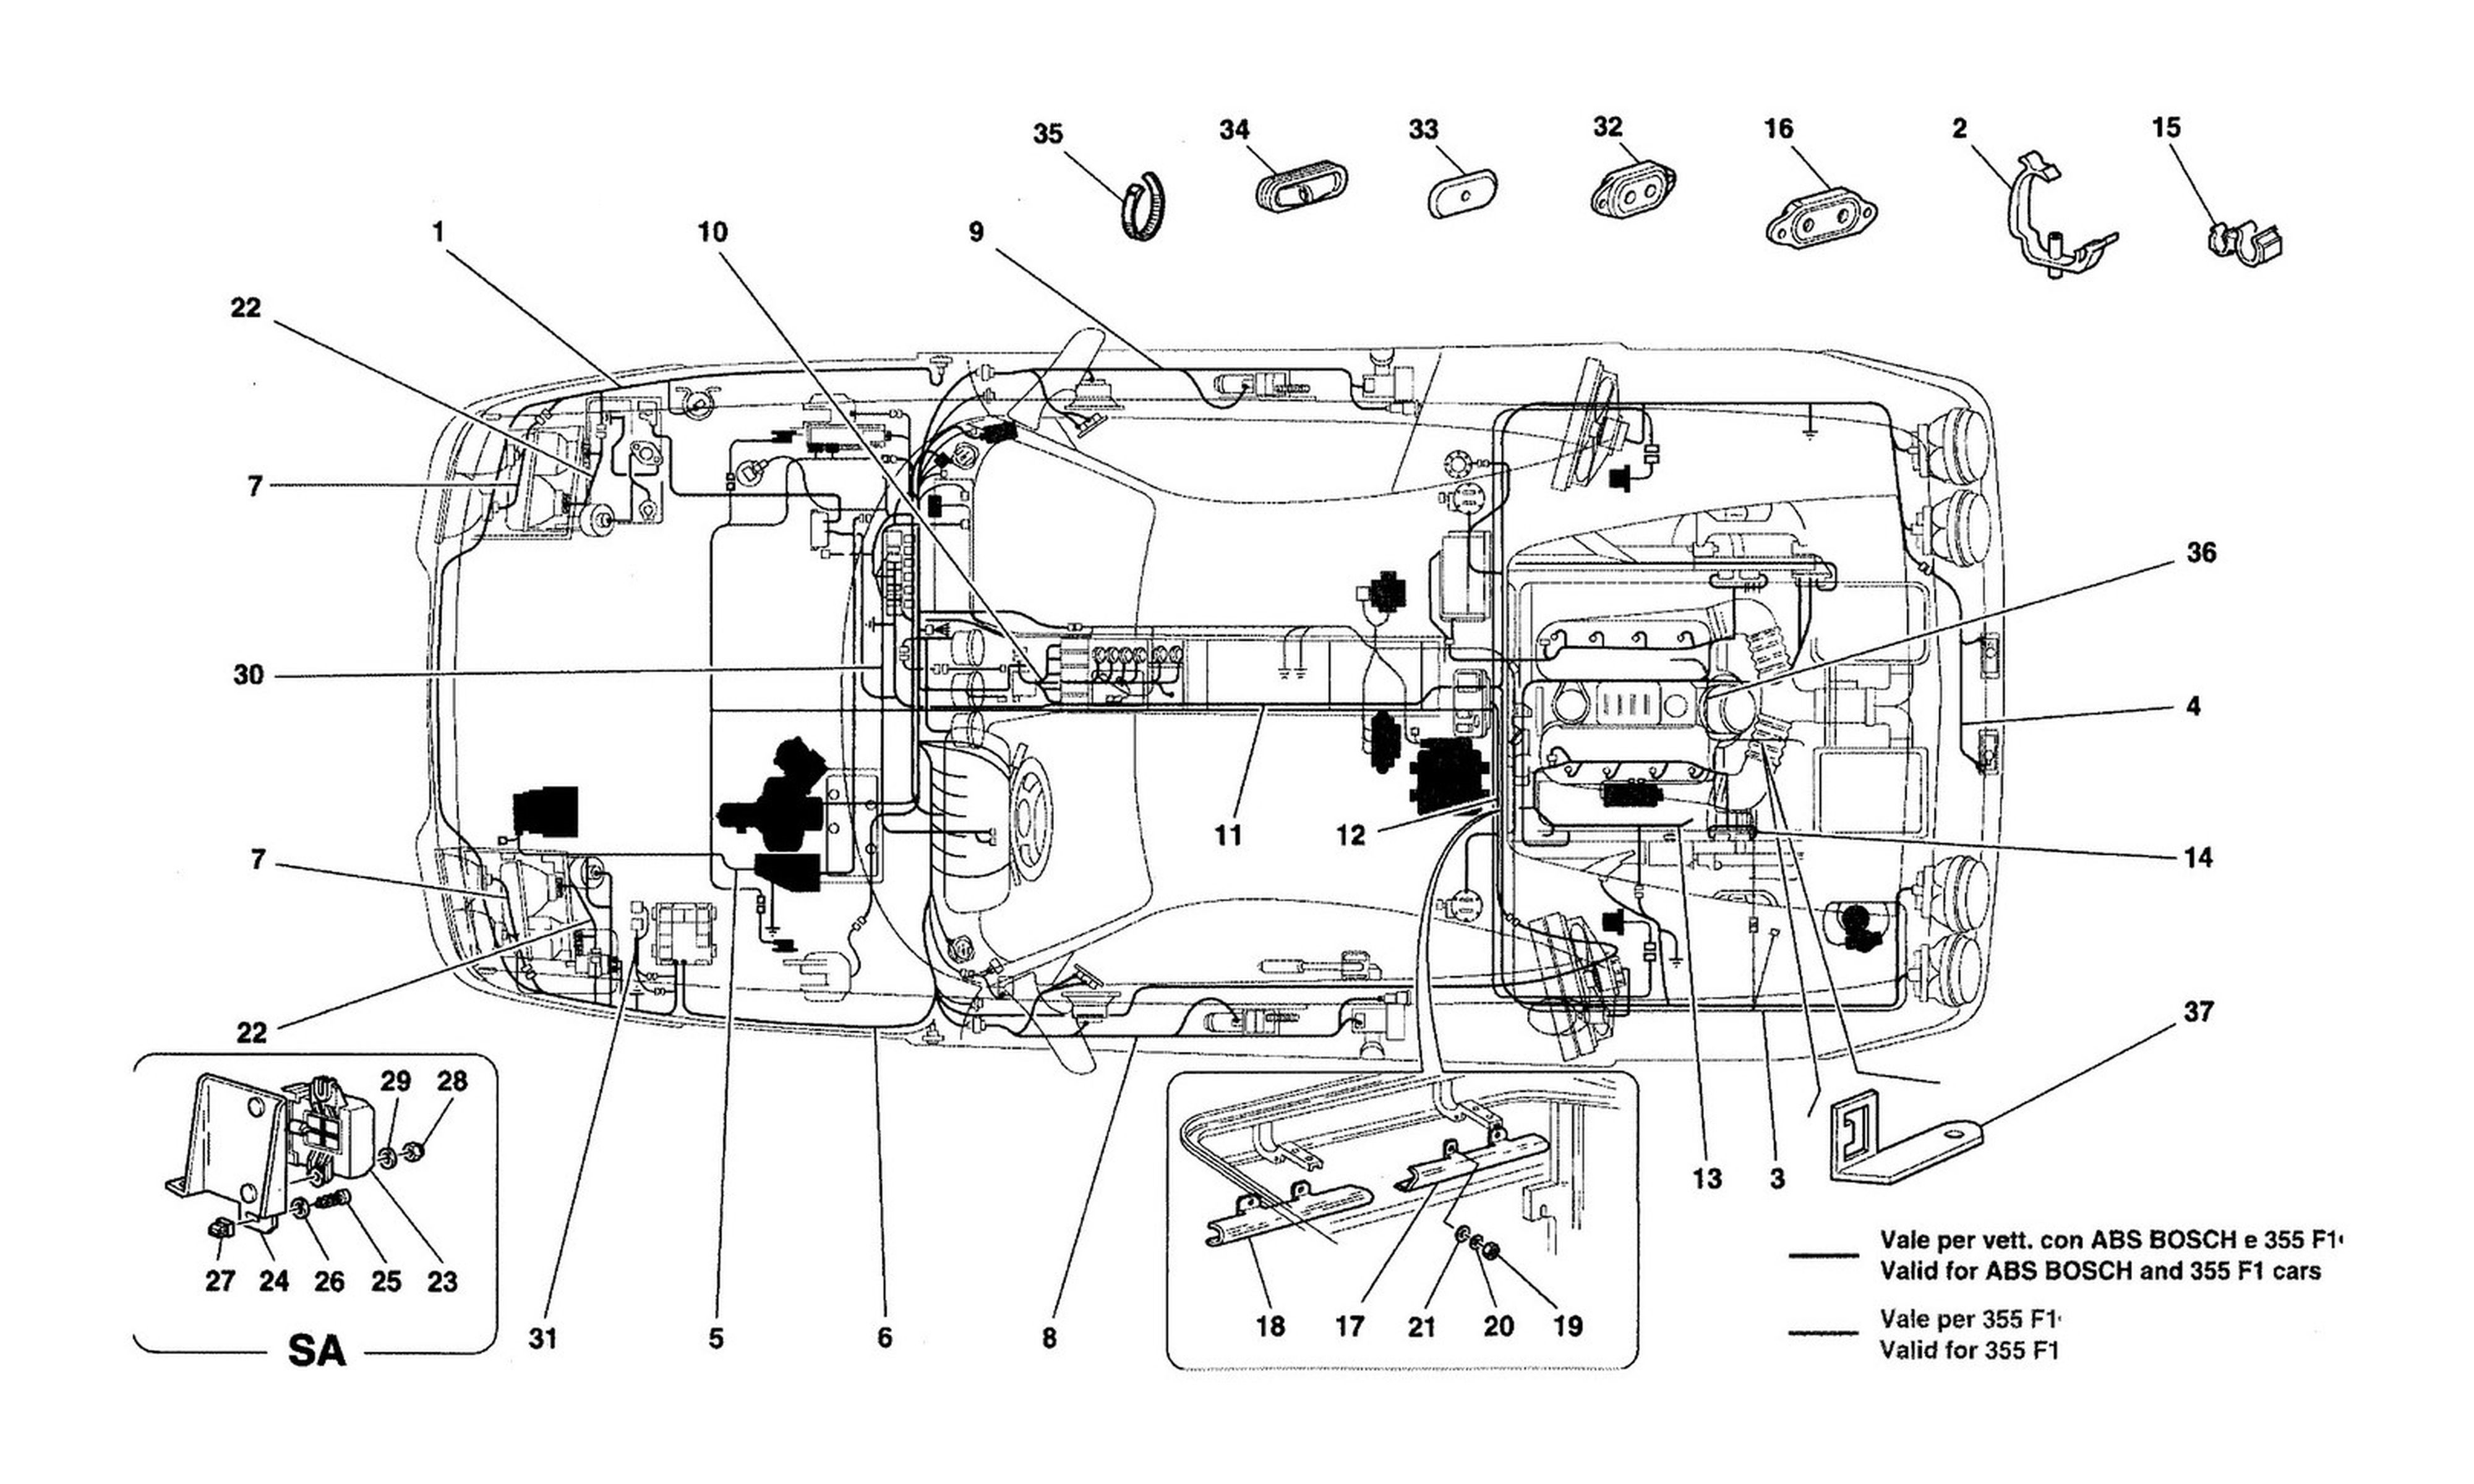 Schematic: Electrical System -Valid For Abs Bosch And 355 F1 Cars-